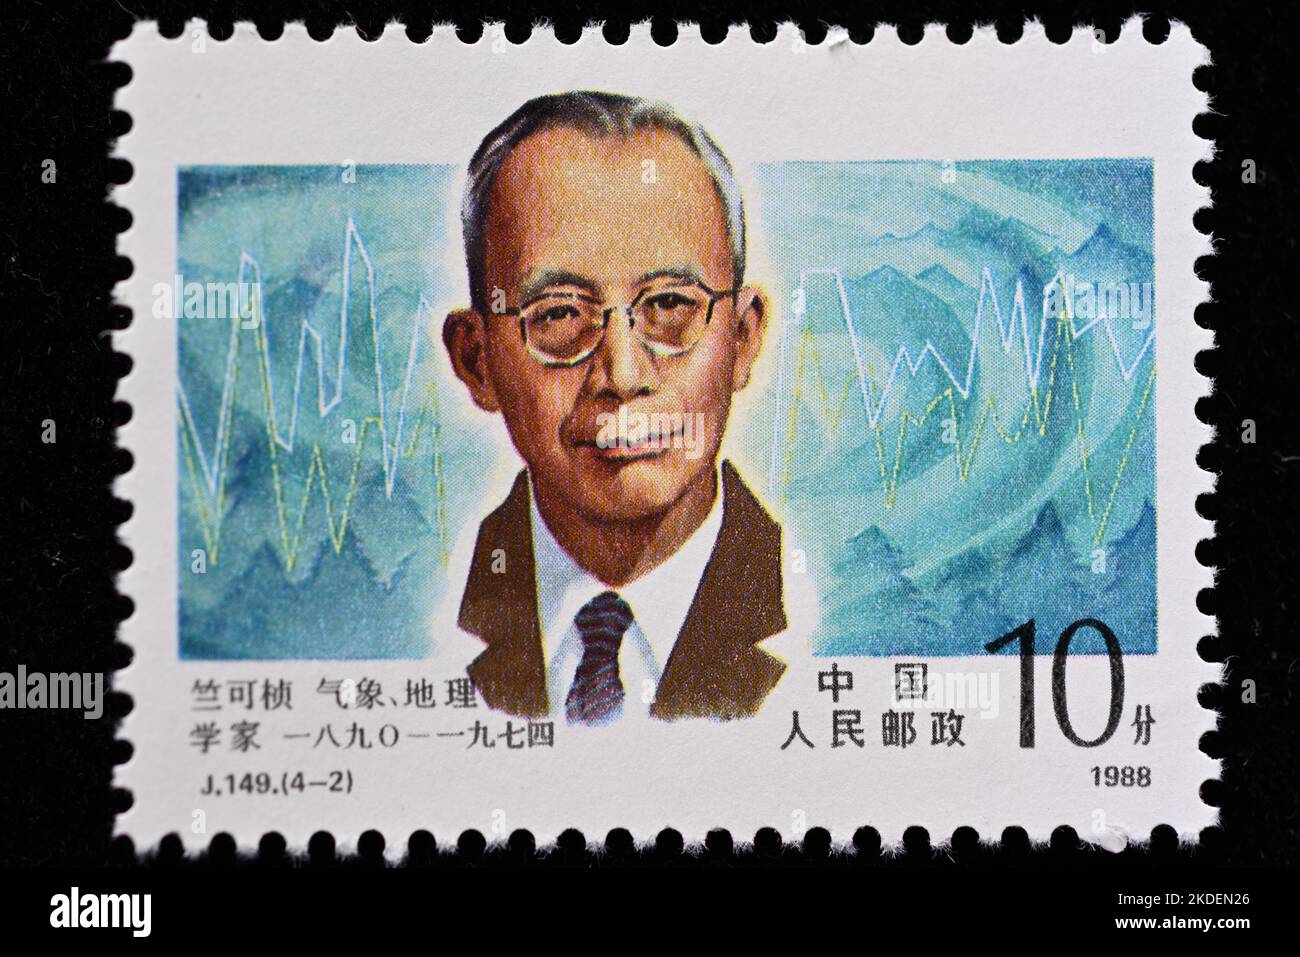 CHINA - CIRCA 1988: A stamp printed in China shows J149, Scientists of Modern China (1st Set) - Meteorologist and geographer Zhu Kezhen , circa 1988 Stock Photo